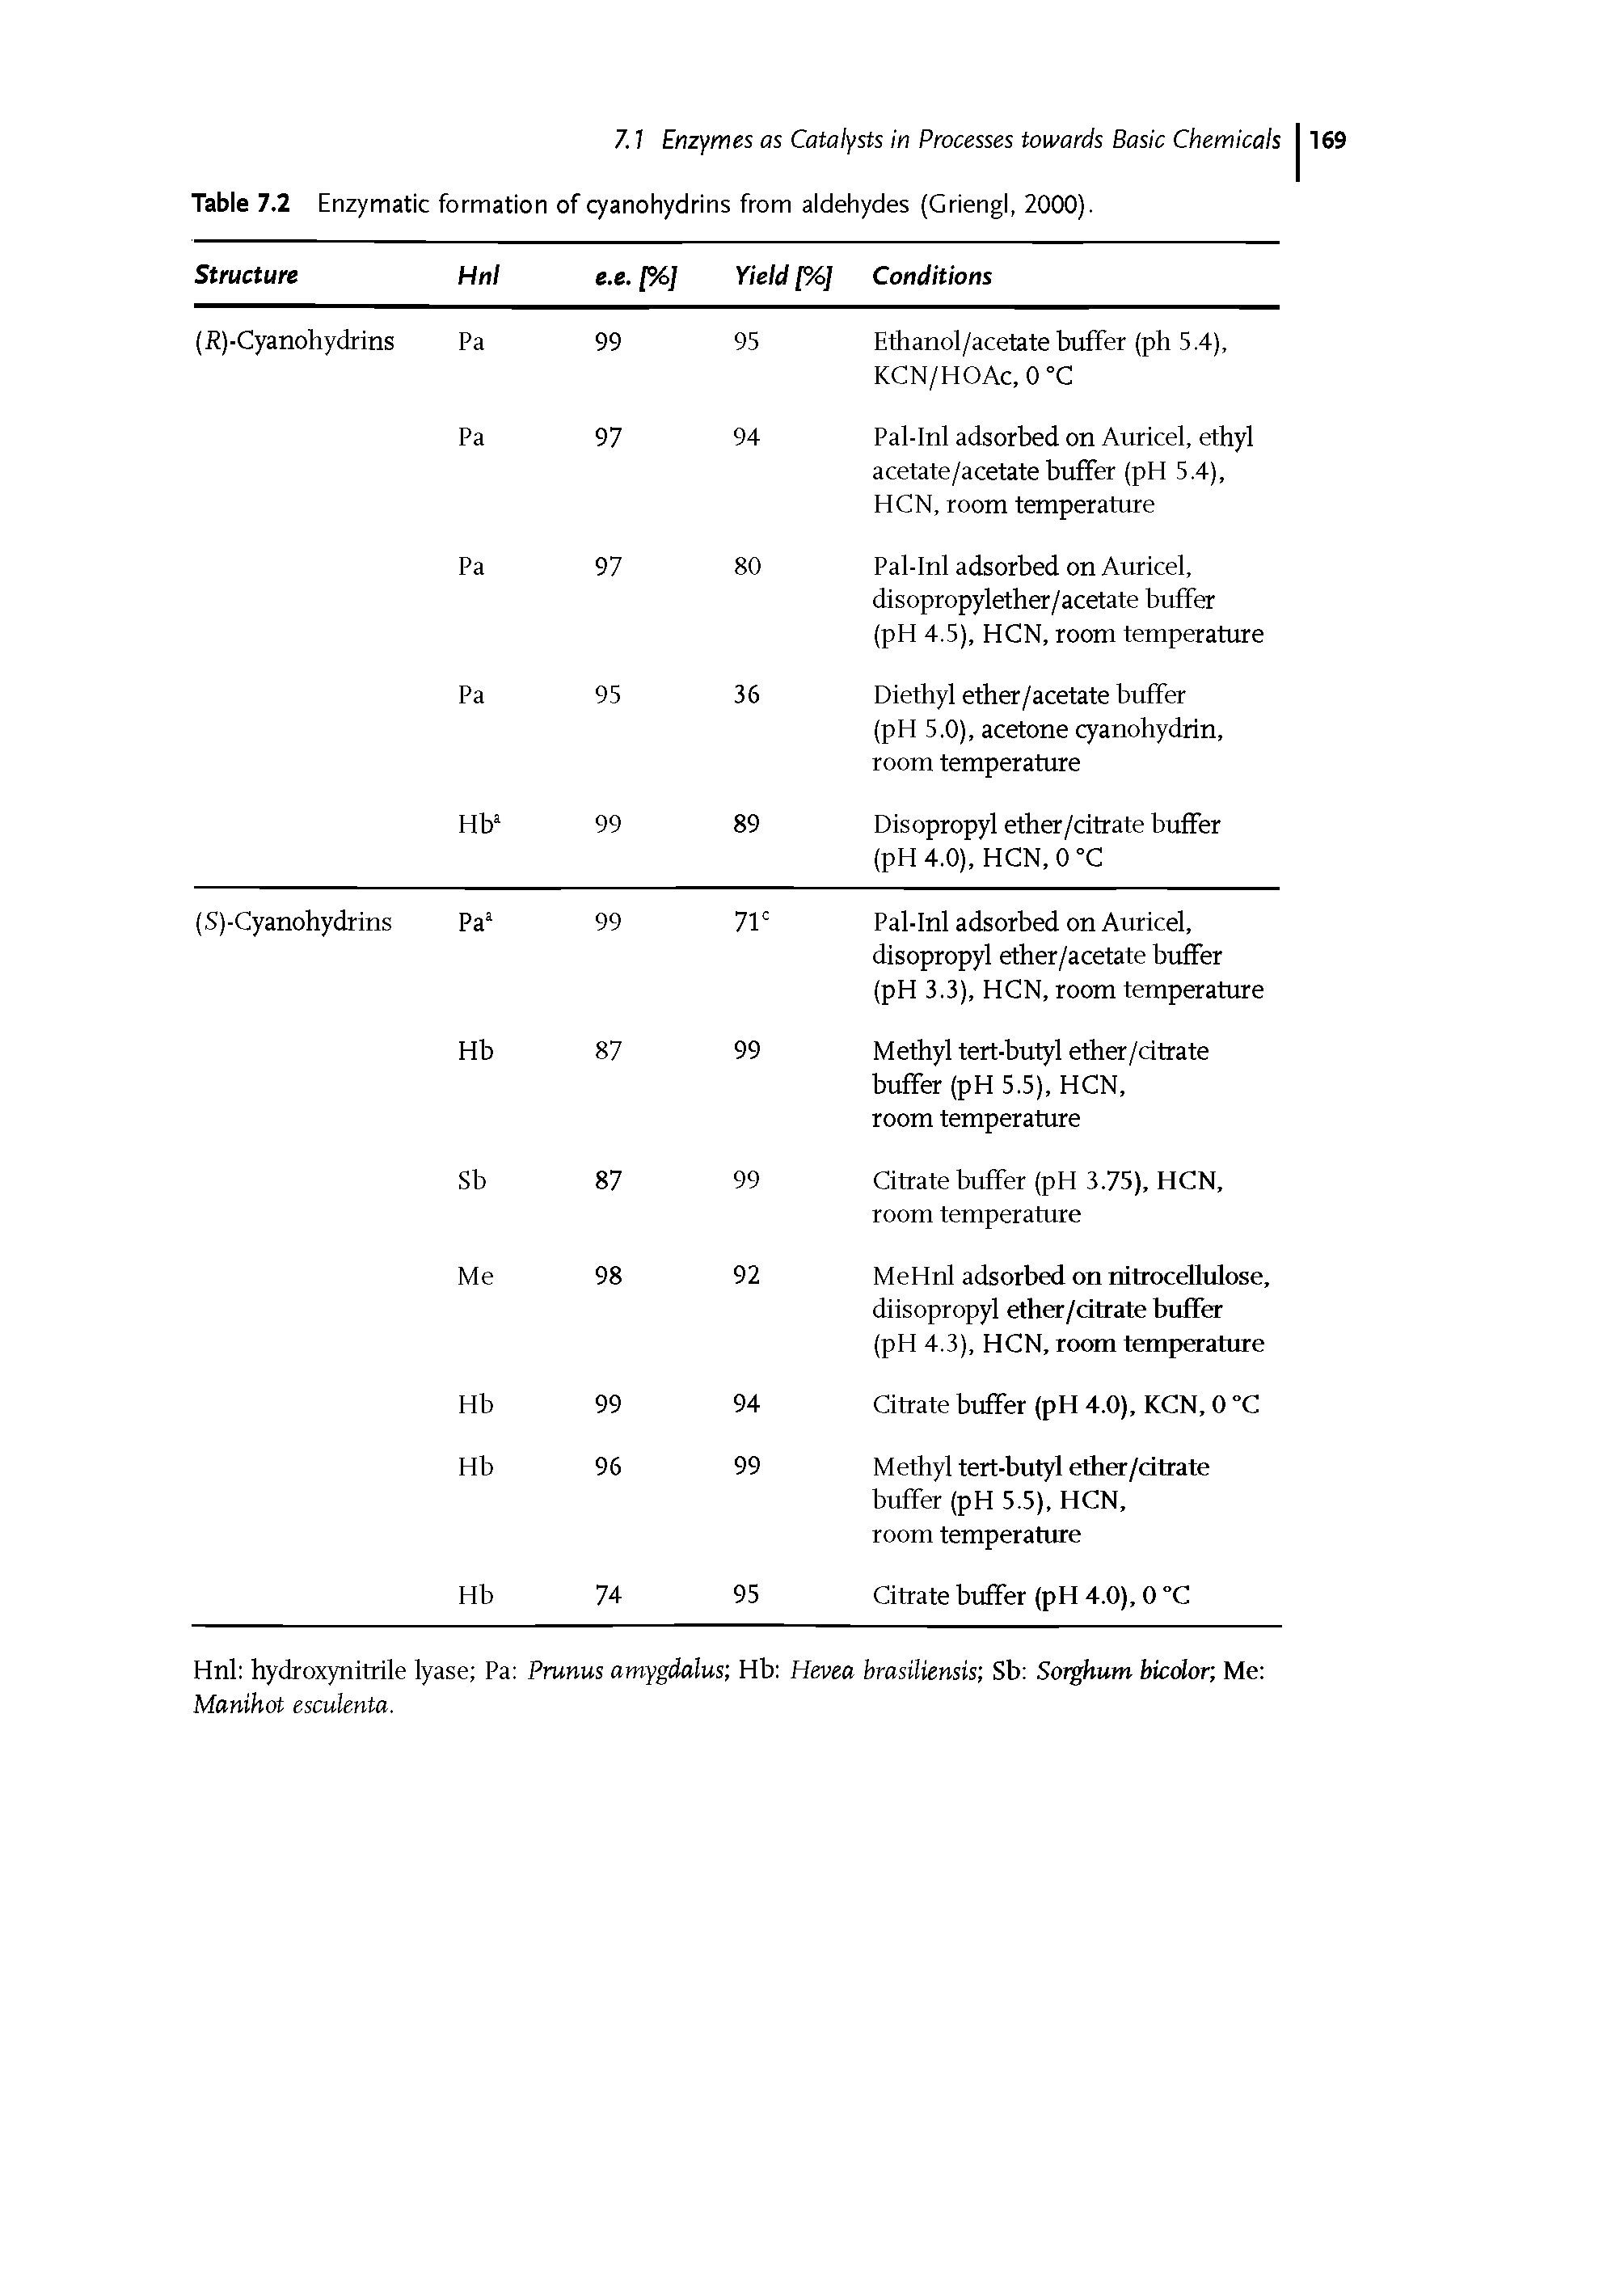 Table 7.2 Enzymatic formation of cyanohydrins from aldehydes (Griengl, 2000).